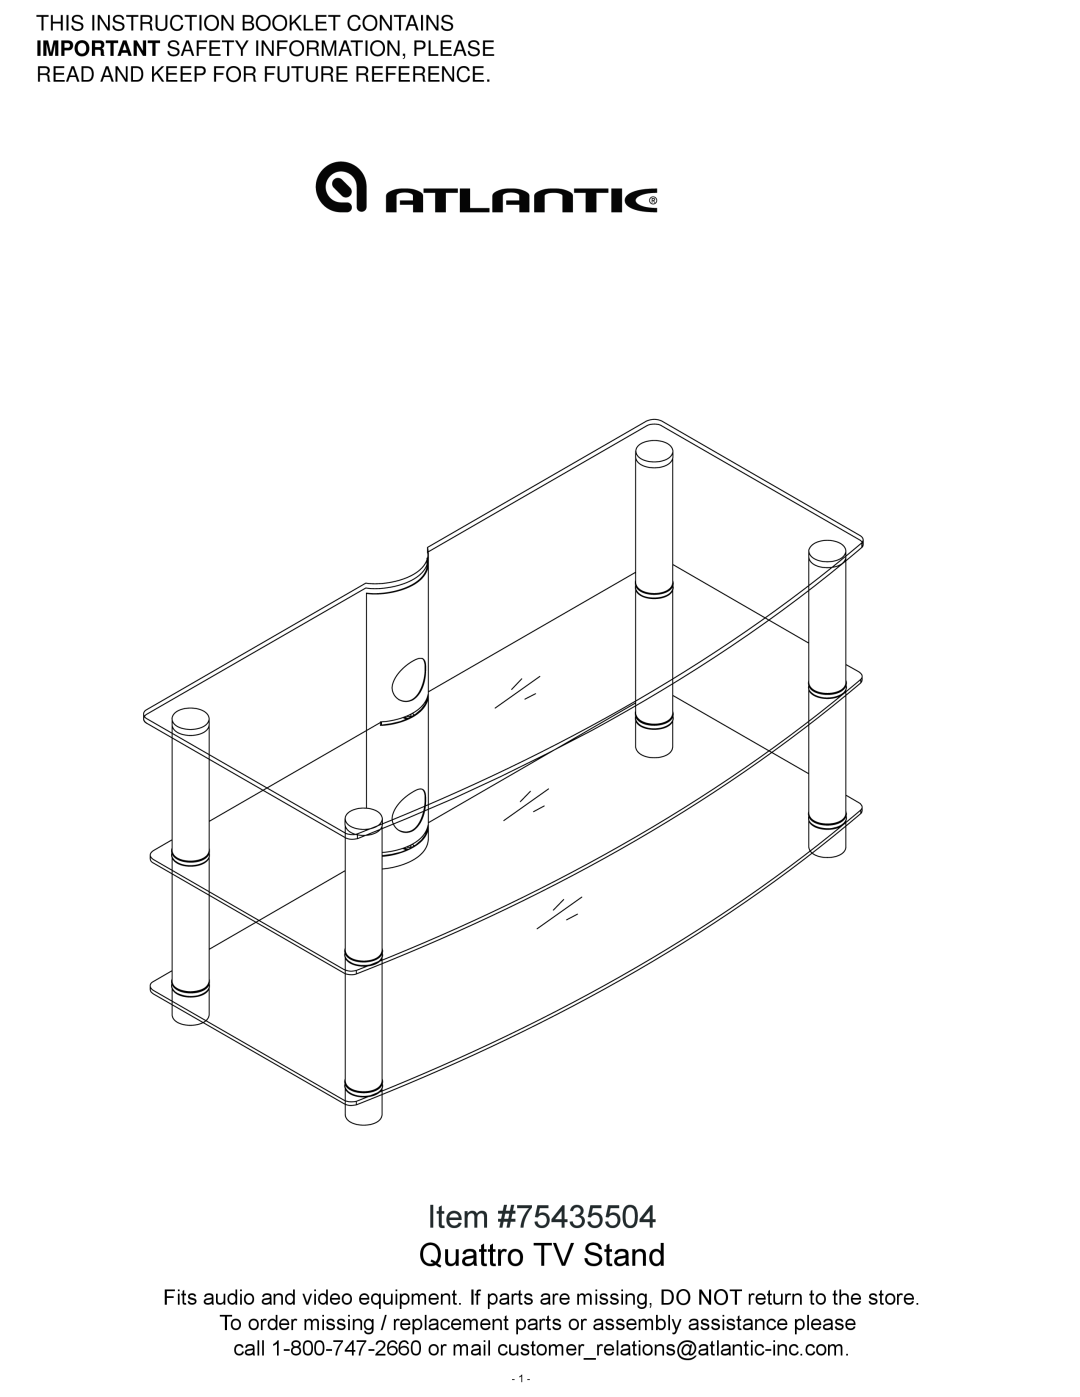 Atlantic manual Item #75435504 Quattro TV Stand, This Instruction Booklet Contains, Read And Keep For Future Reference 